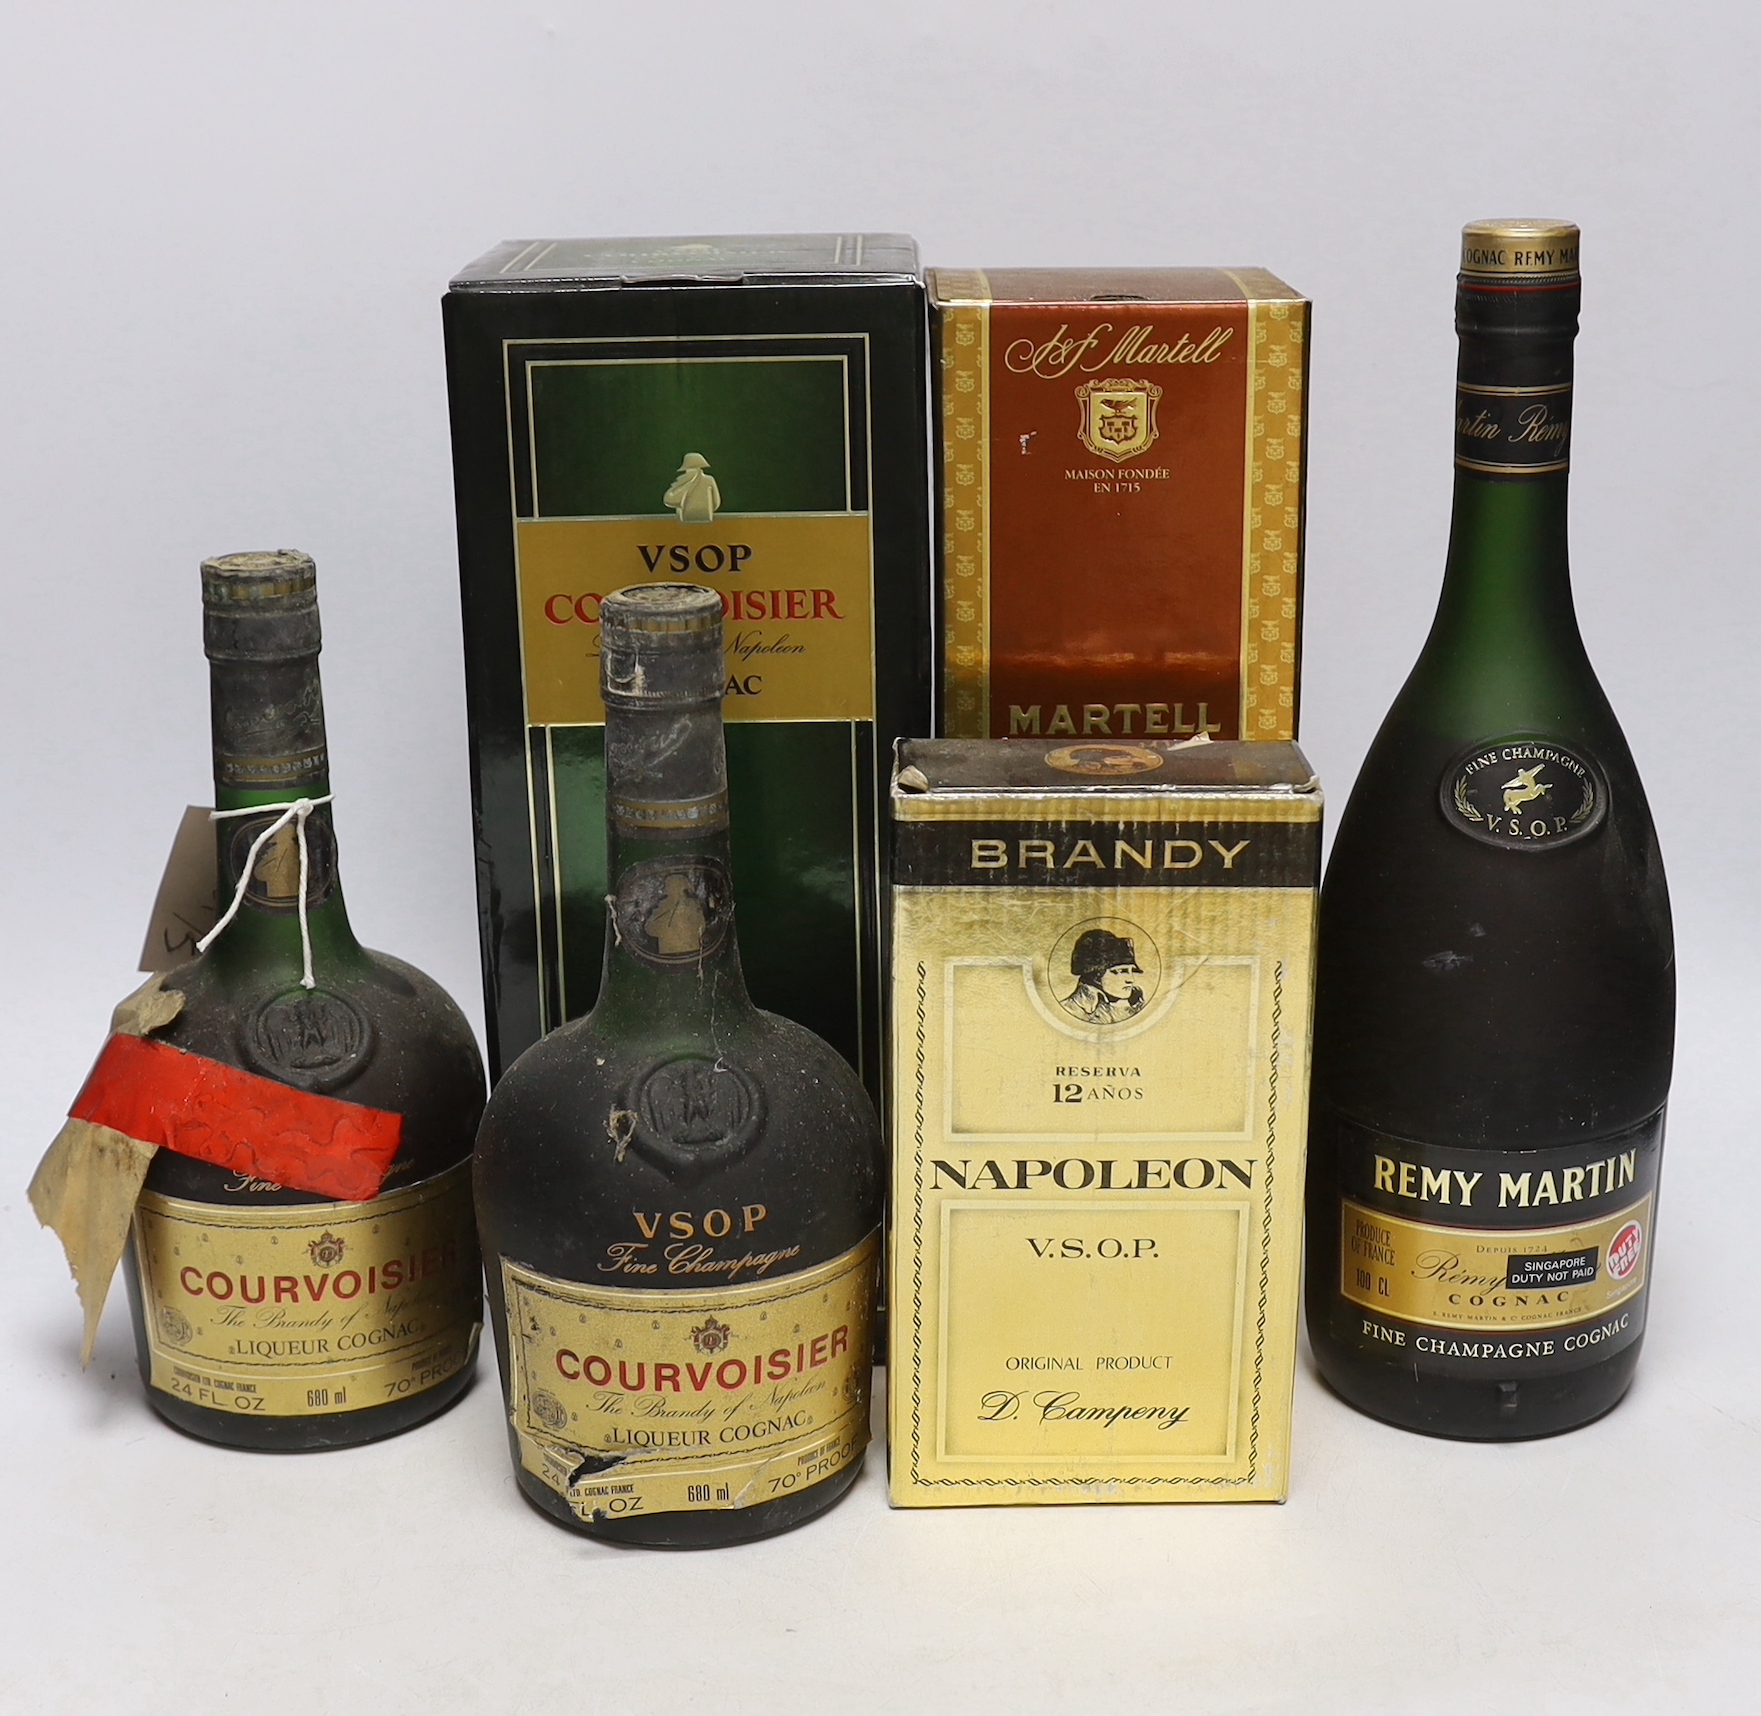 Six bottles of Brandy / Cognac; three bottles of Courvoisier, a Remy Martin, a Napoleon and a Martell